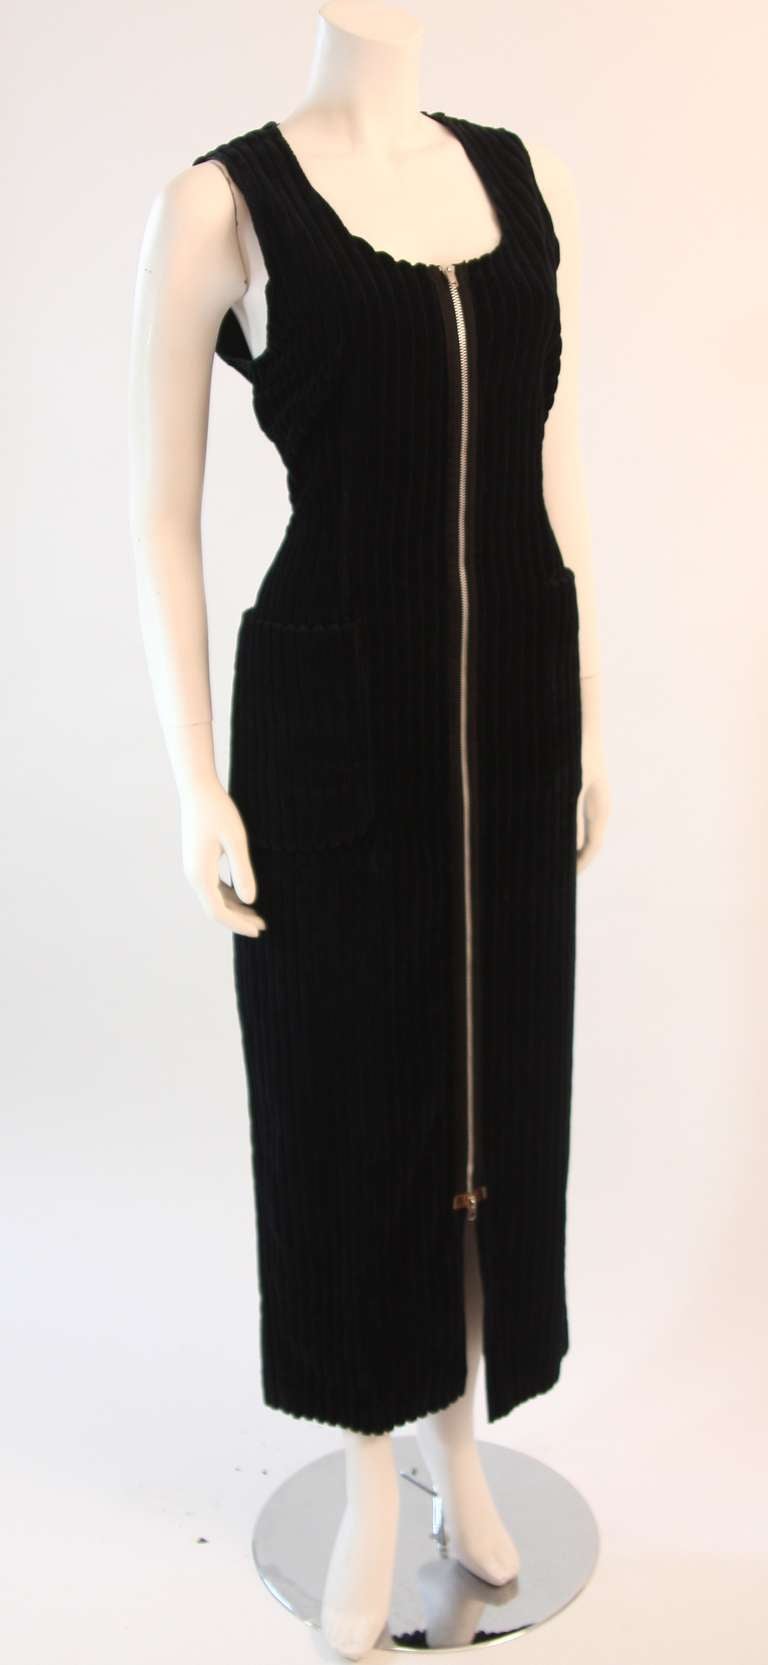 This is an intriguing Maison Martin Margiela design. It features two front pockets and a full length center front zipper.  It can be worn fully zipped as a dress or even styled as a full length vest. Very chic!

Measures (approximate)
Length: 54